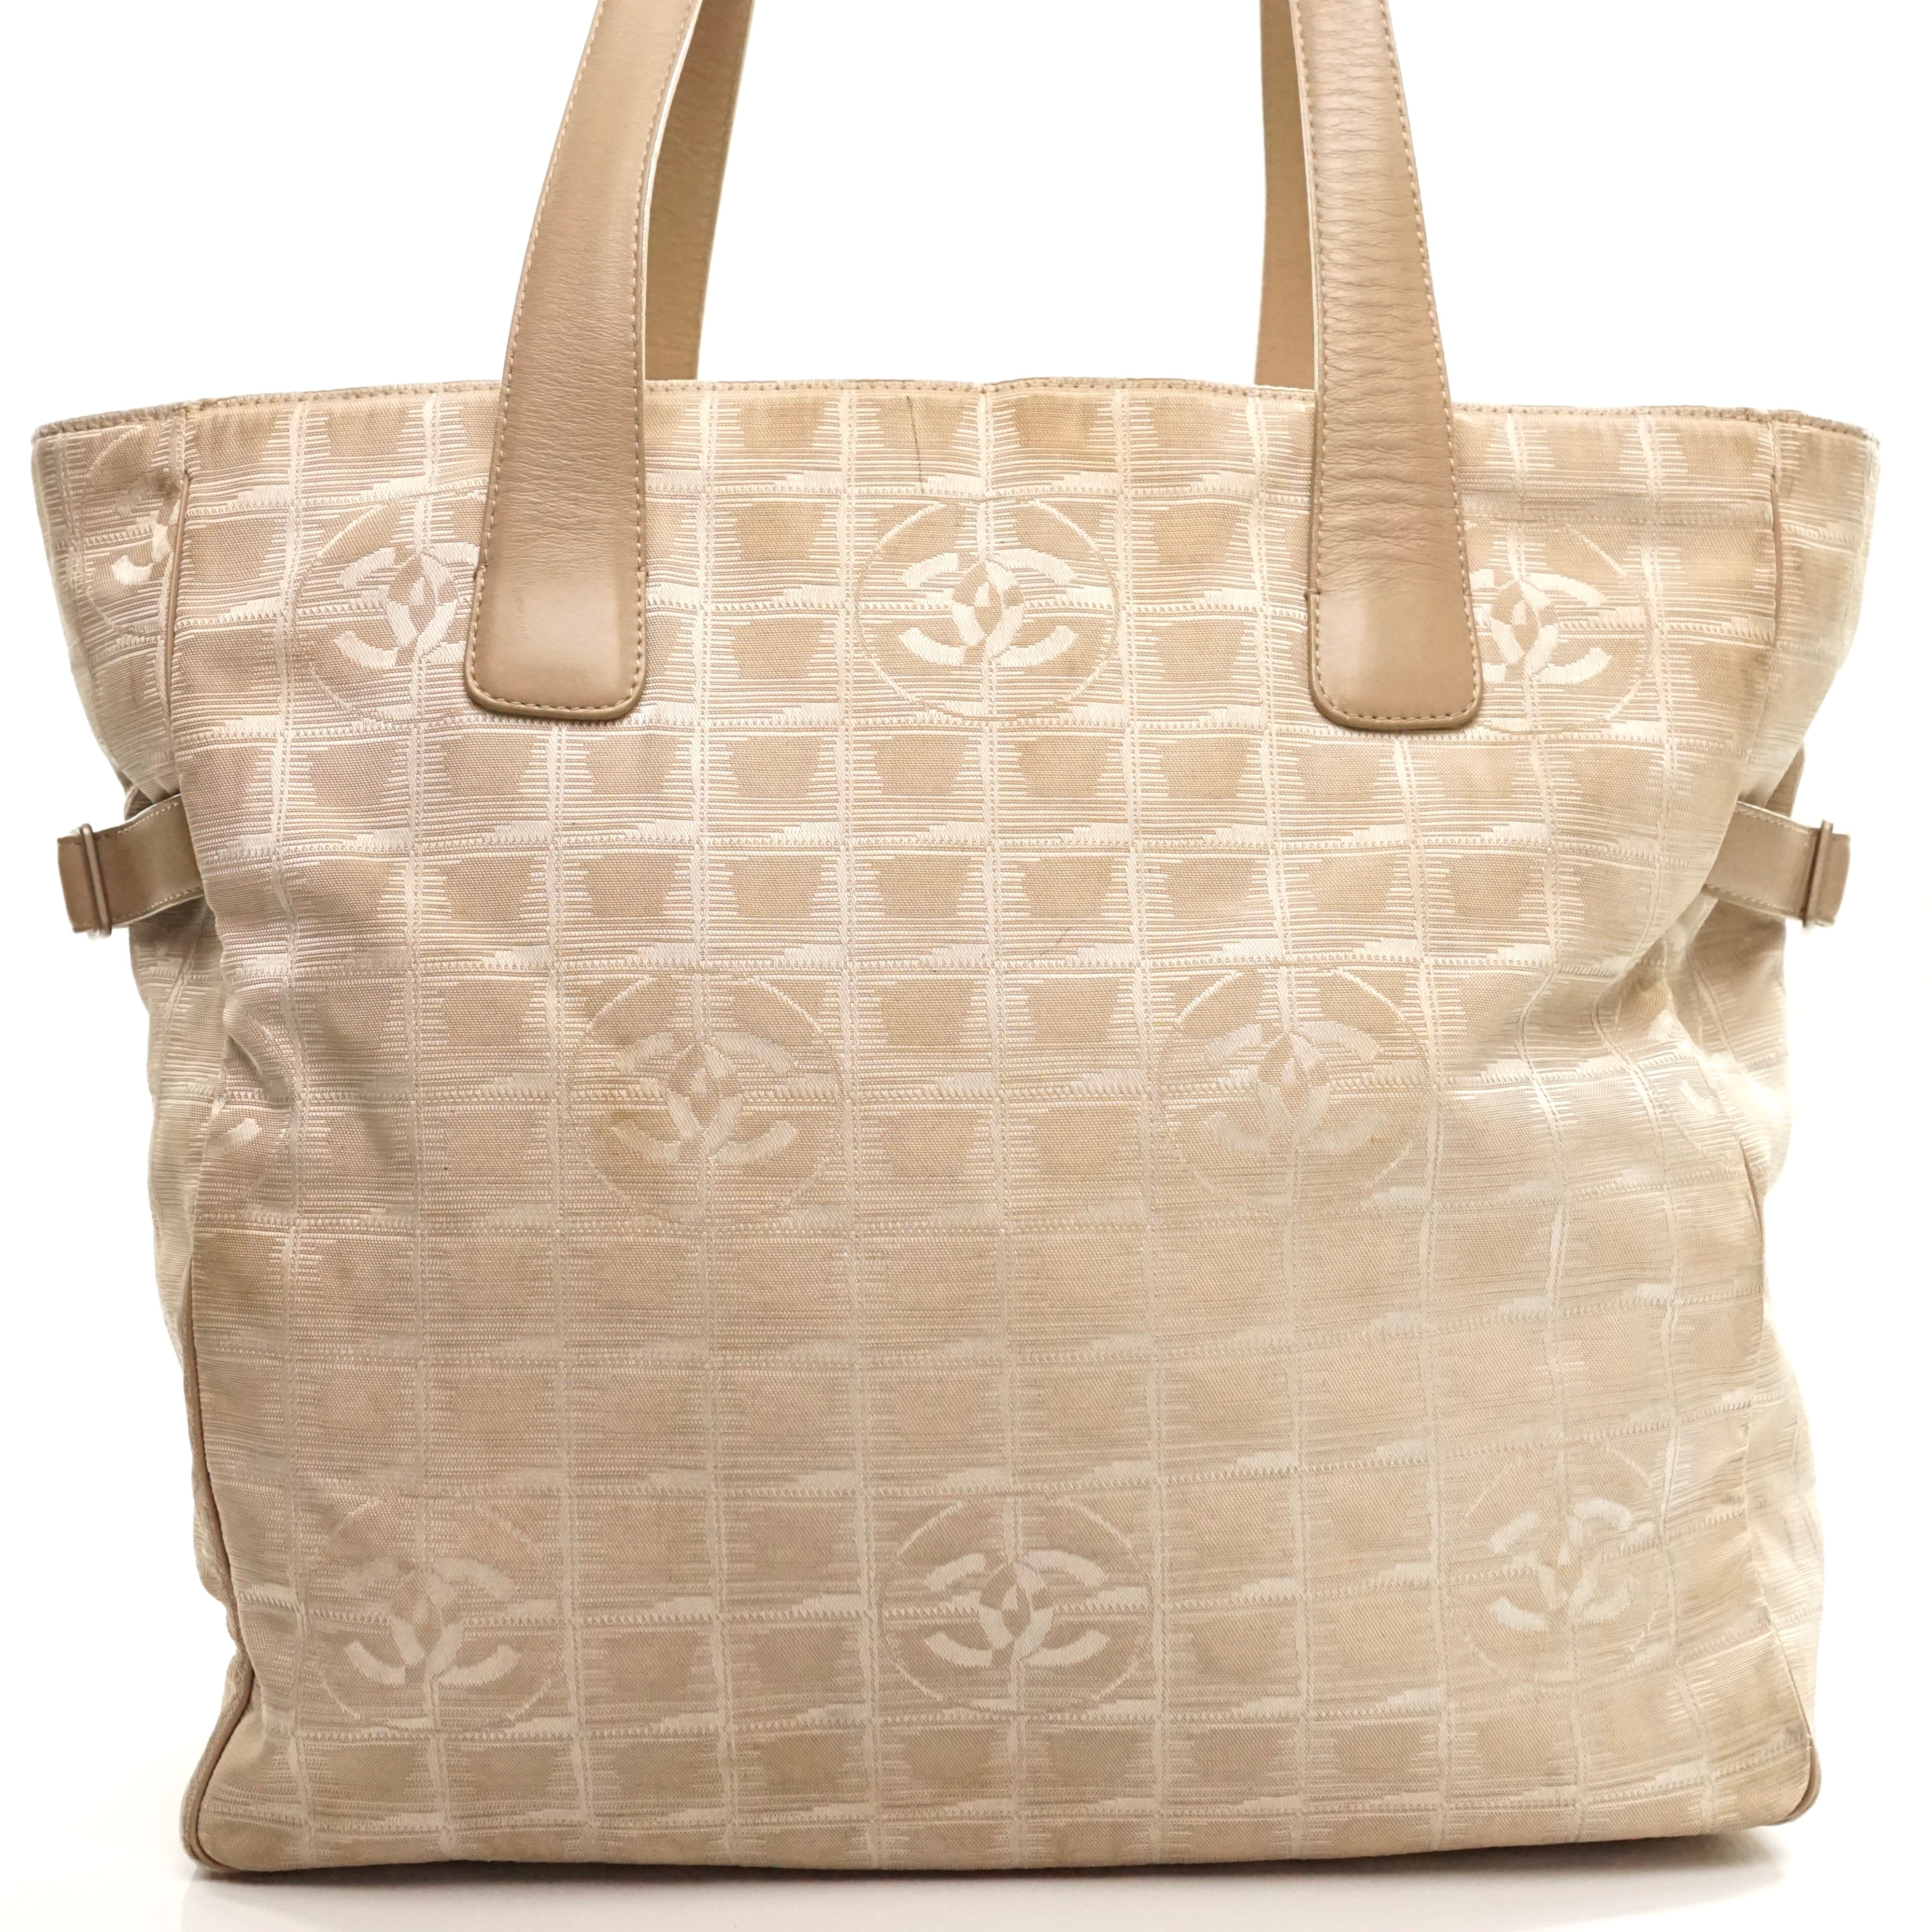 CHANEL Travel line Canvas Leather Beige Tote Bag CT14586L